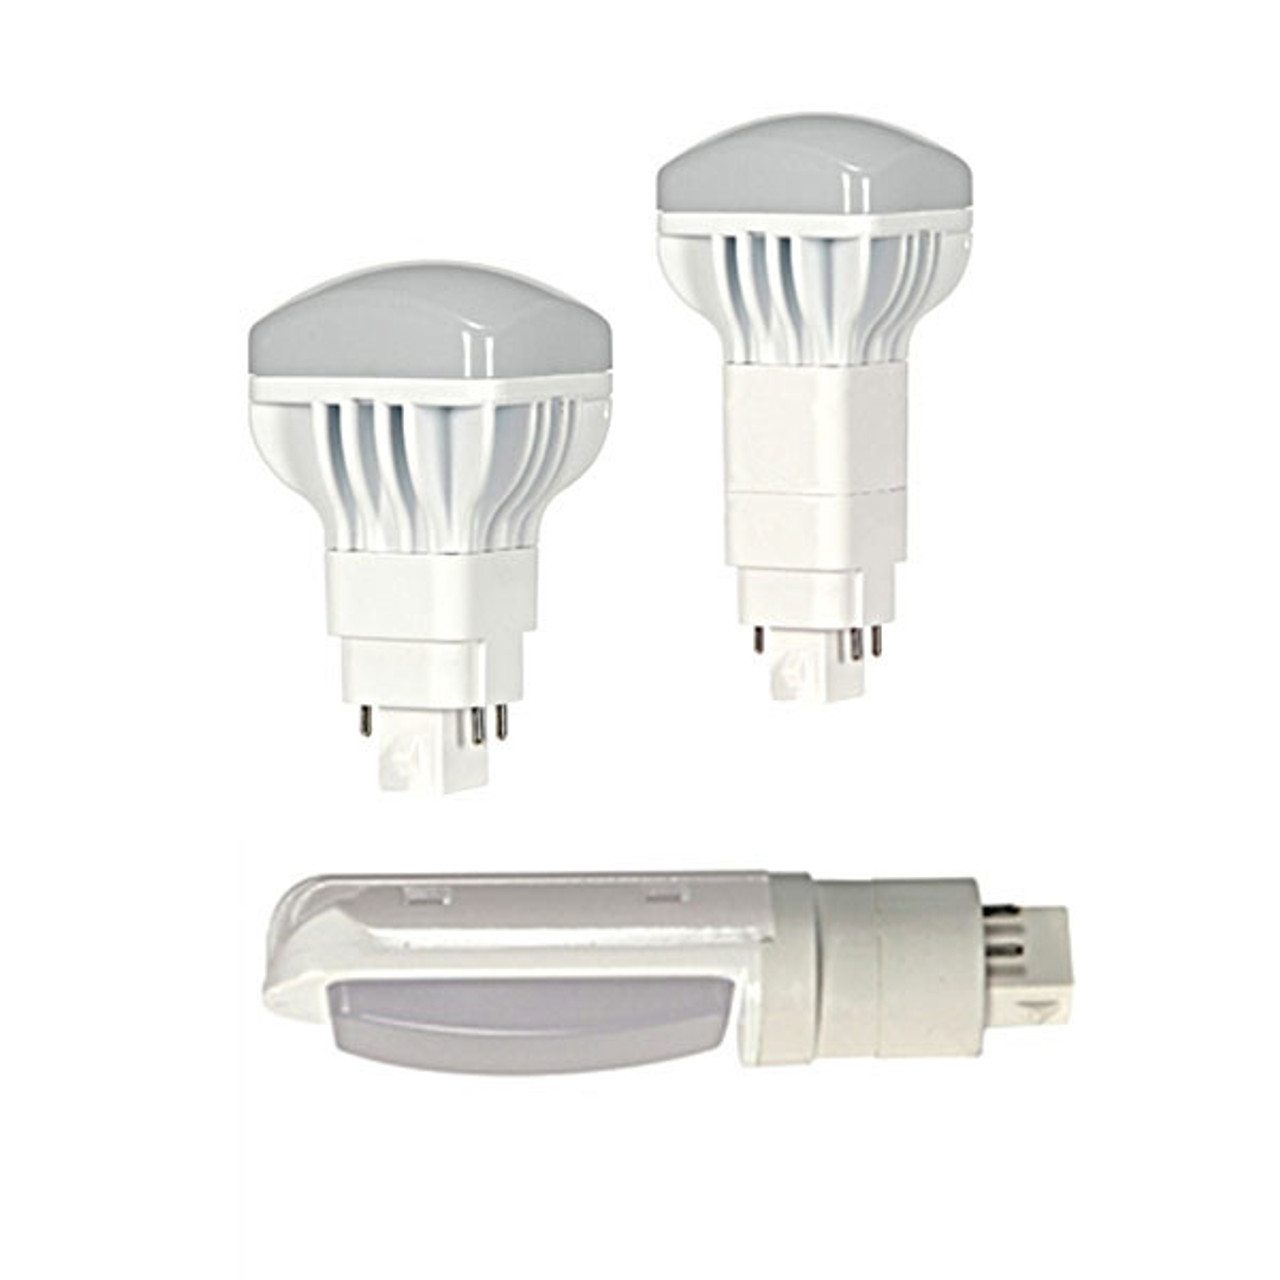 LED 'N Play Replacement for 4-pin bulbs in electronic ballast All G24Q bases